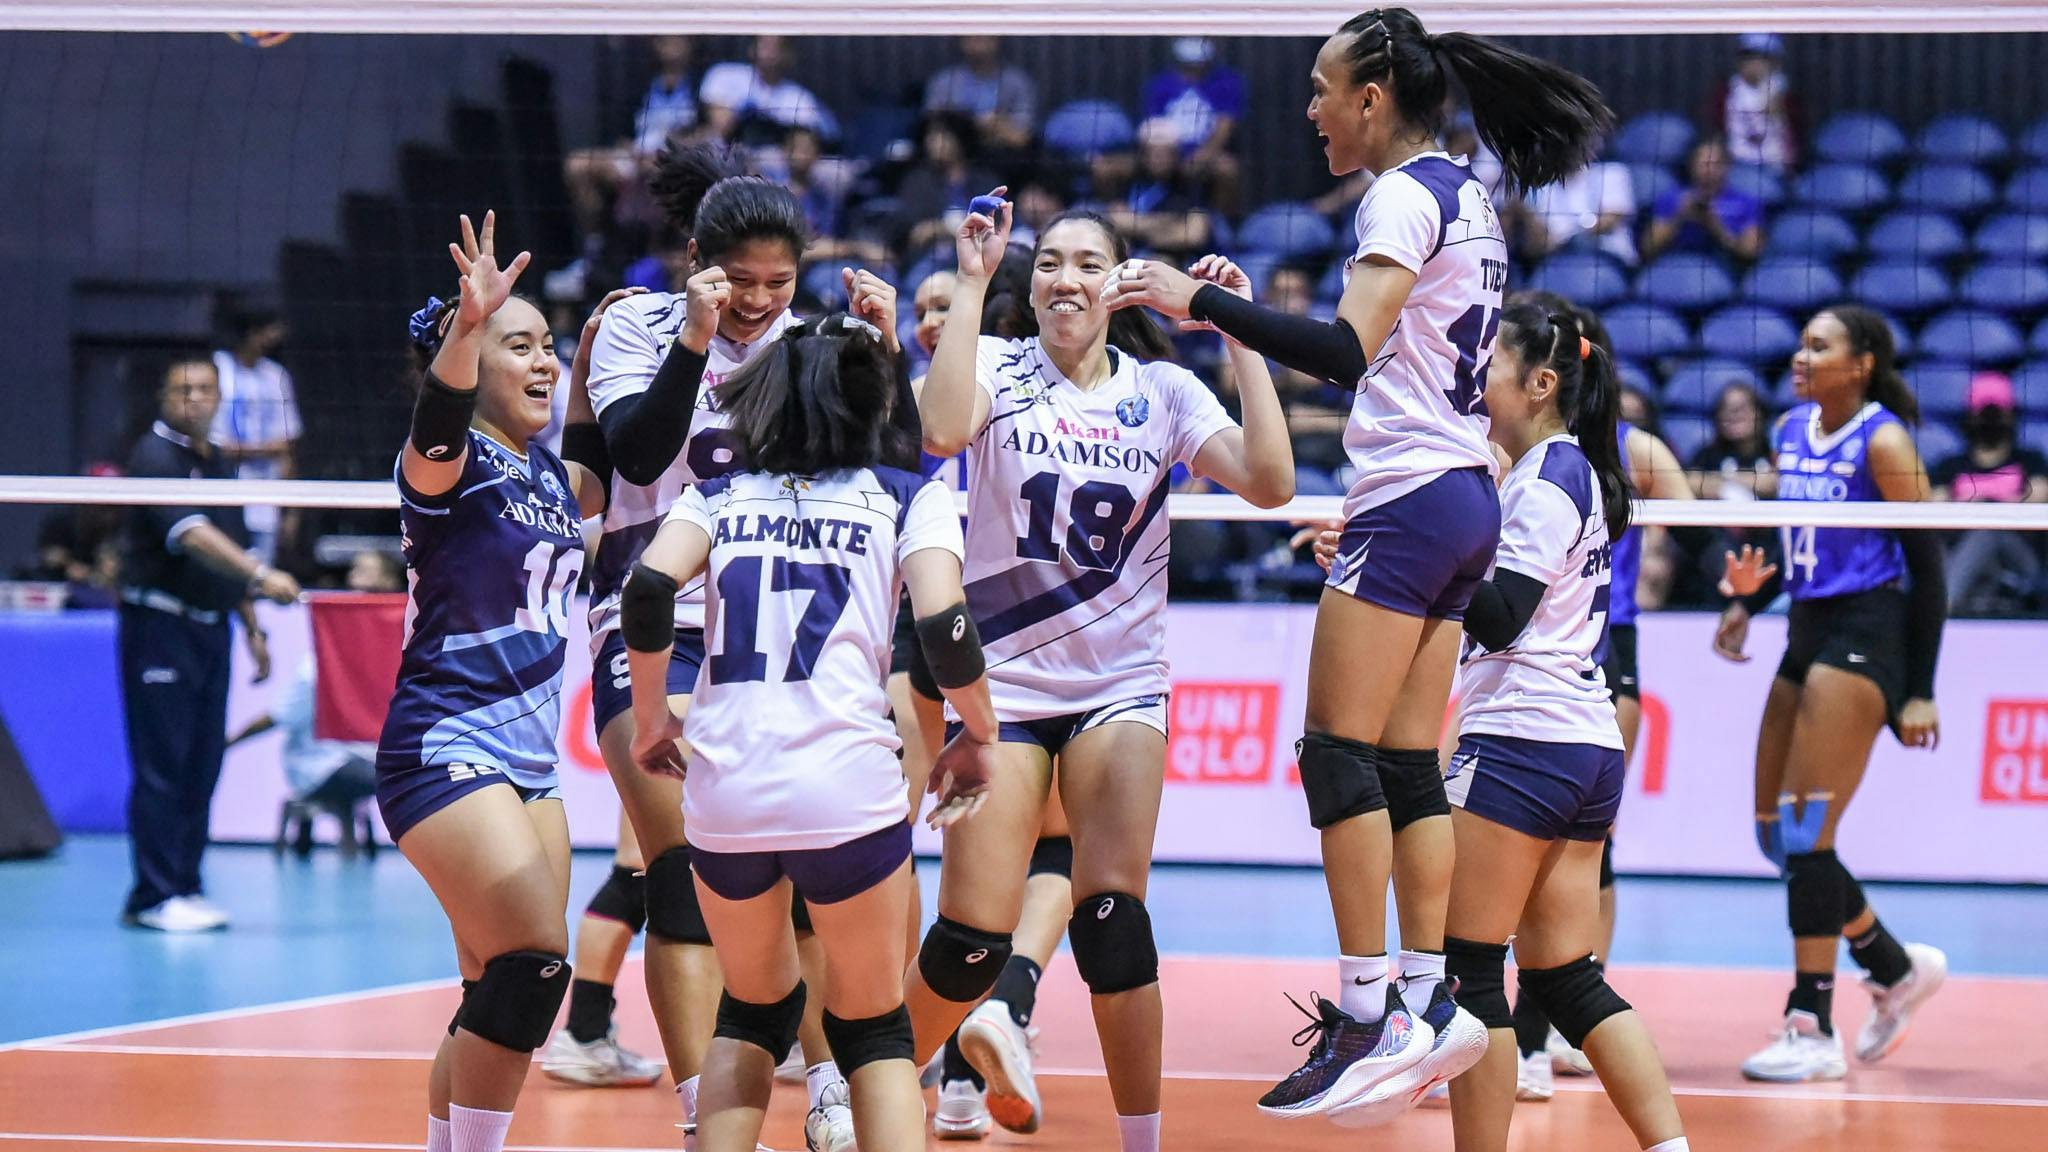 Adamson sweeps Ateneo in elimination series for first time in 14 years